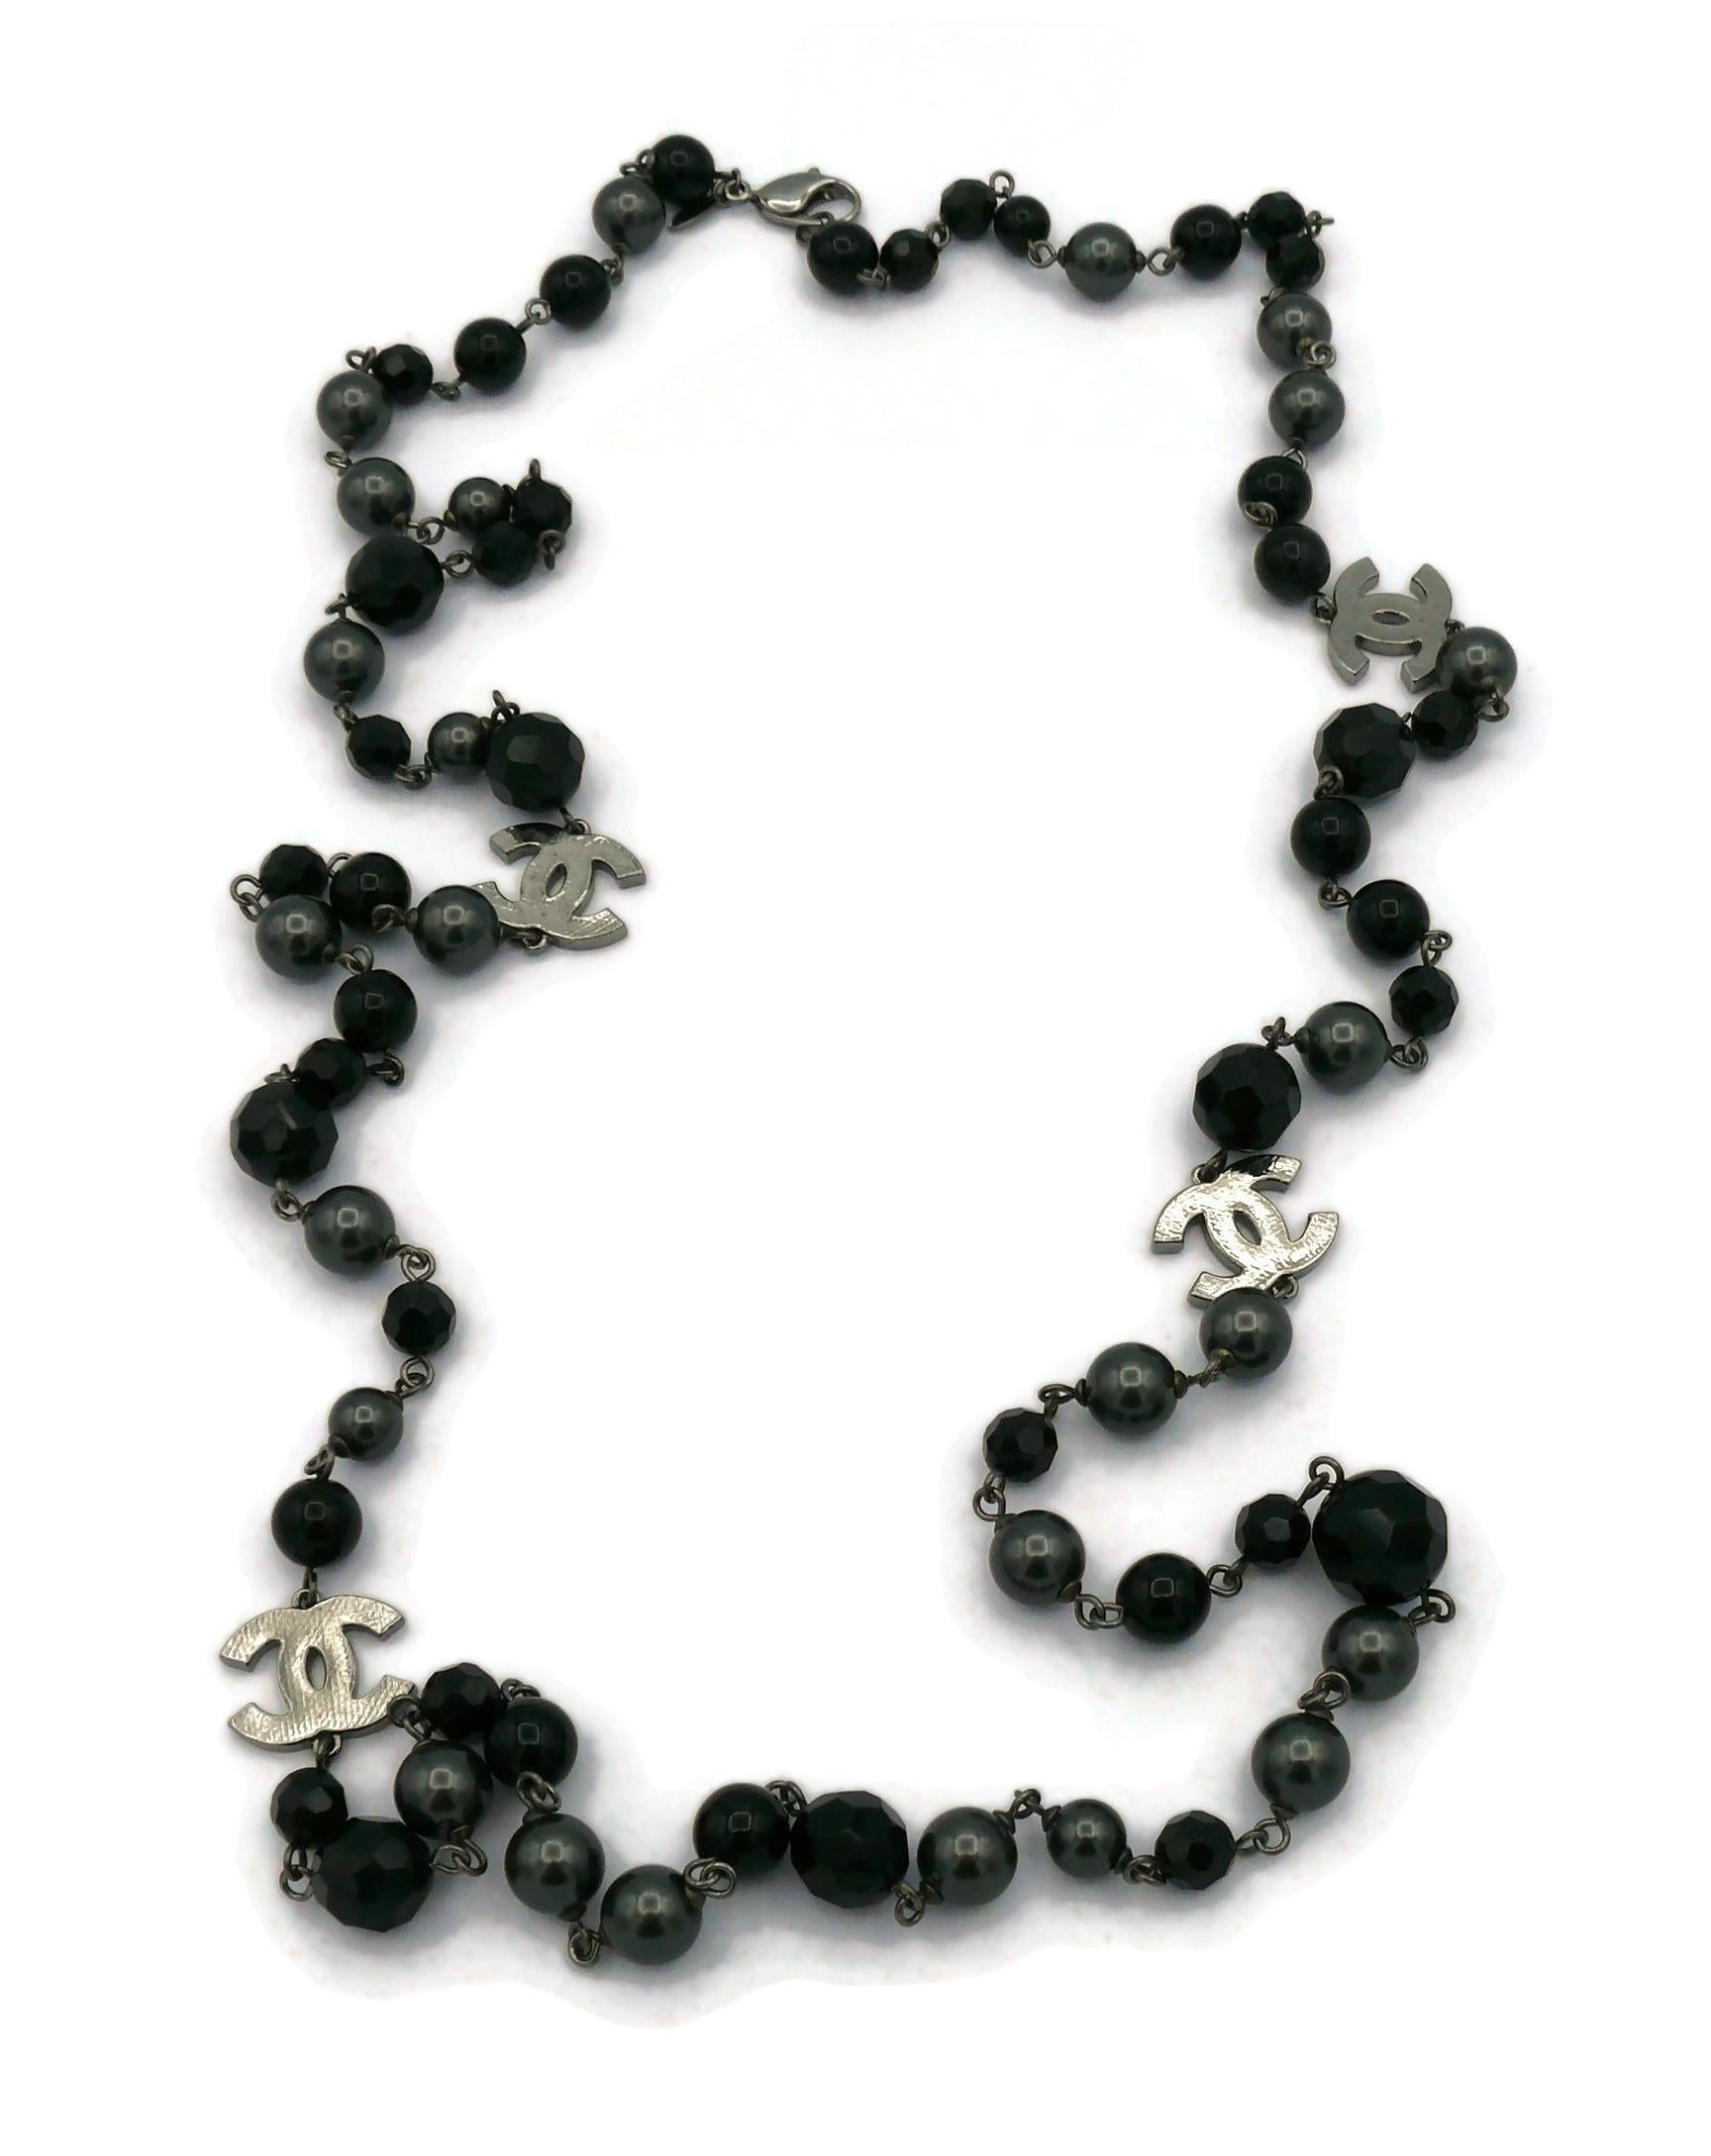 black pearl chanel necklace